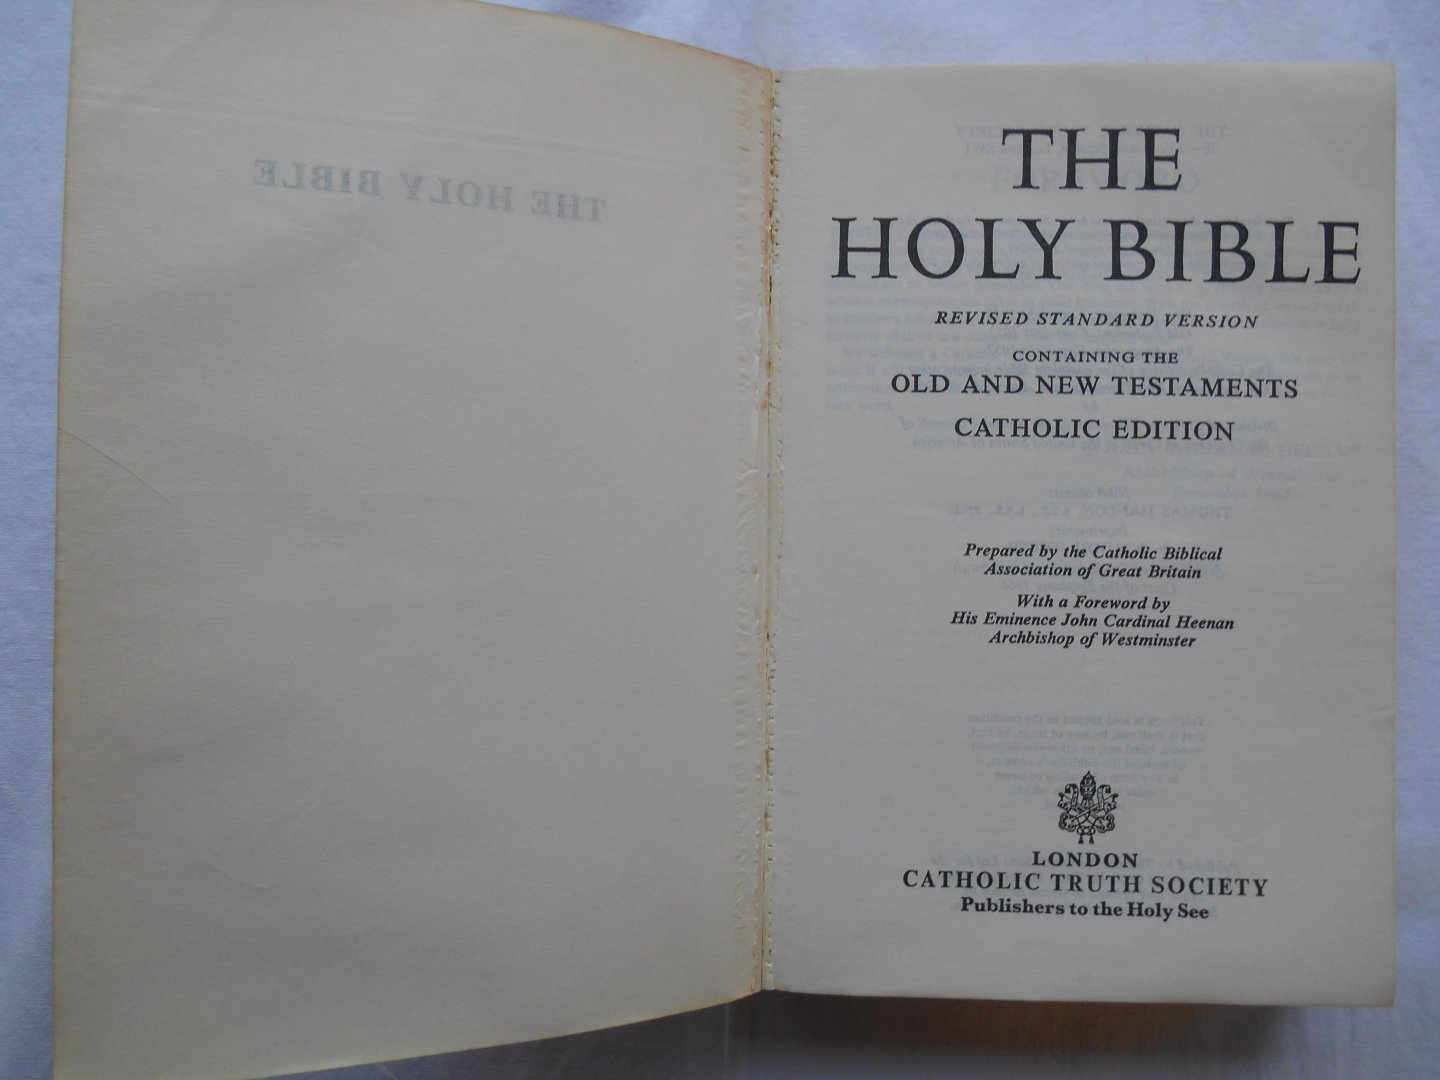 Catholic Biblical Association of Great Britain - The Holy Bible, Old and New Testaments Catholic Edition